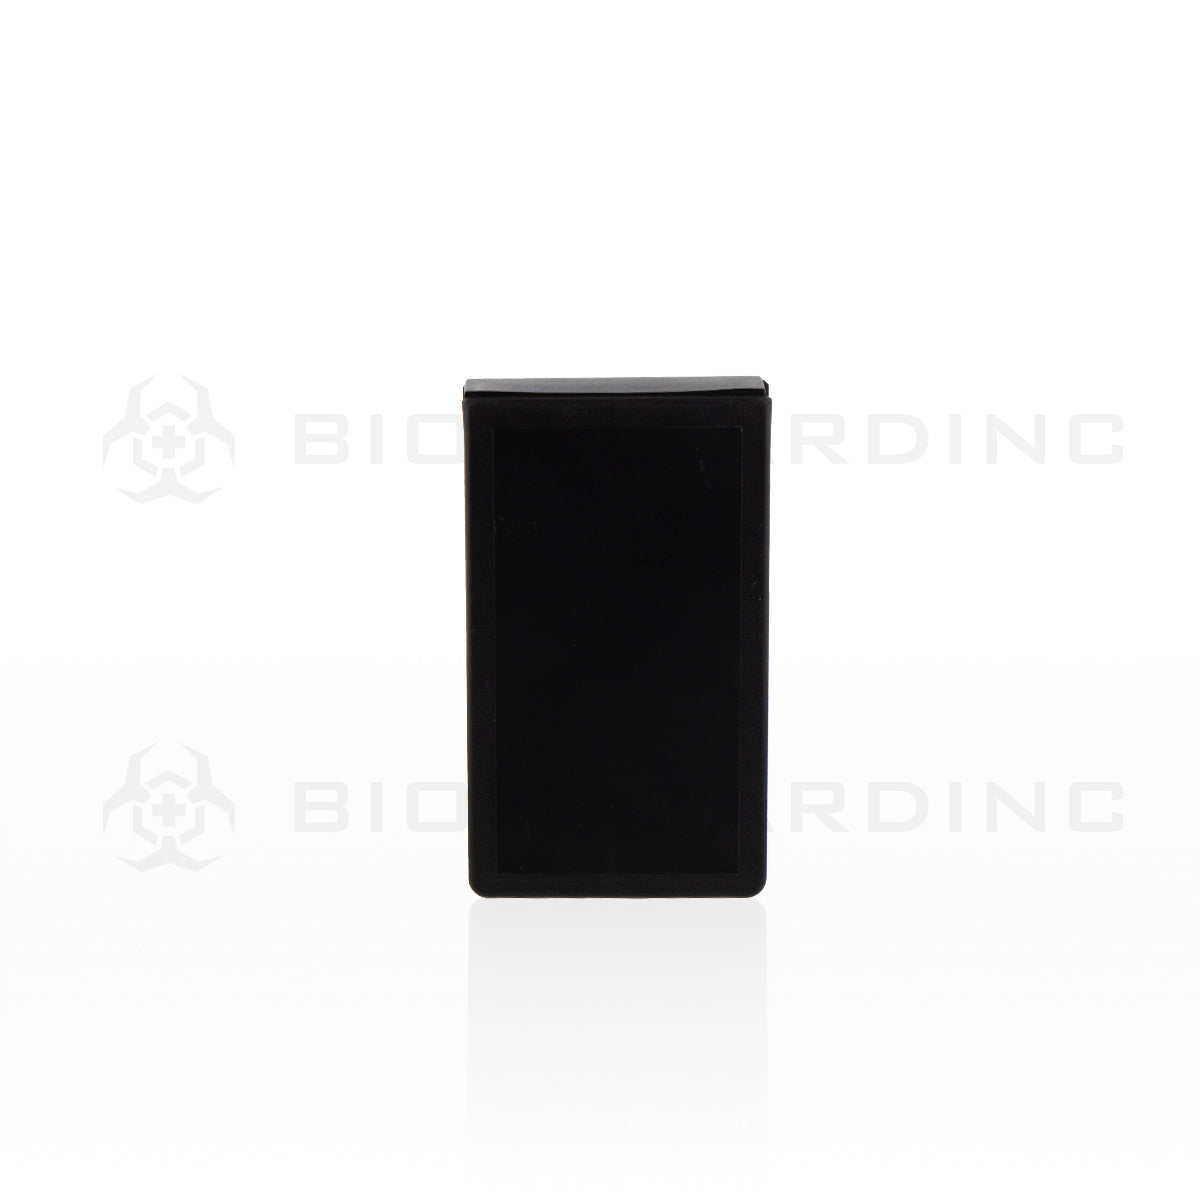 Preroll Cases | 85mm Portable Joint Boxes | 360 Count Black Pre Roll Case Biohazard Inc   